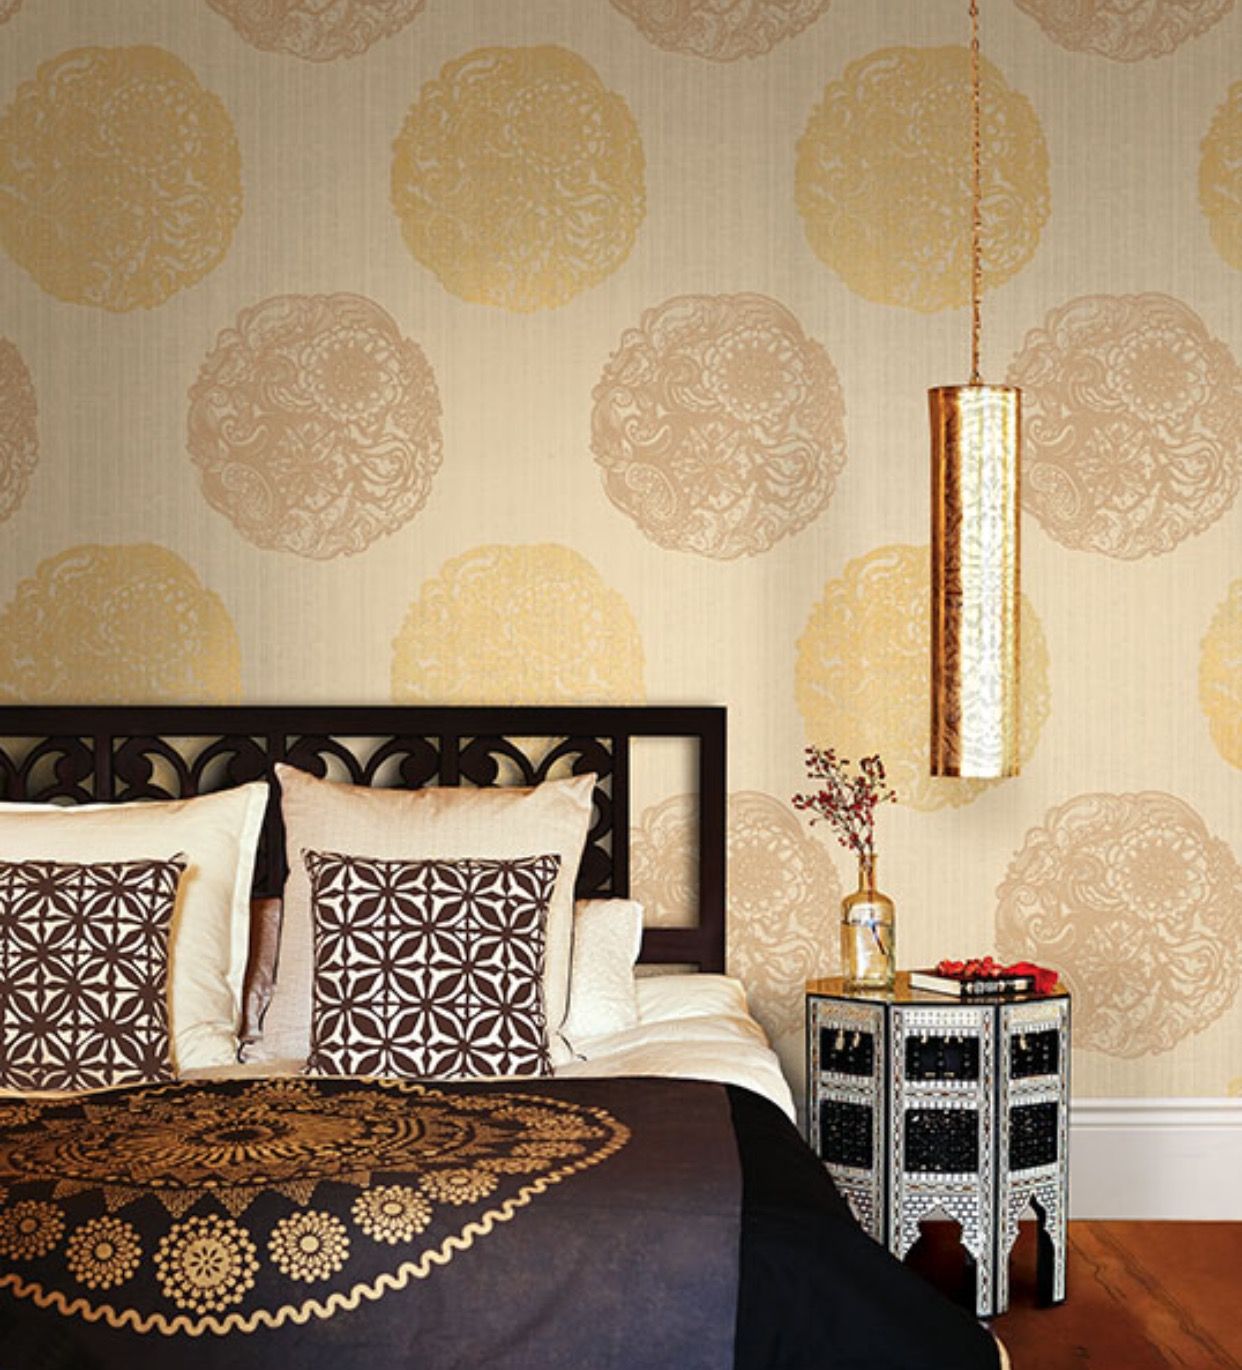 Geometric Glamour: Contemporary Wallpaper Patterns For Bedroom Wow Factor